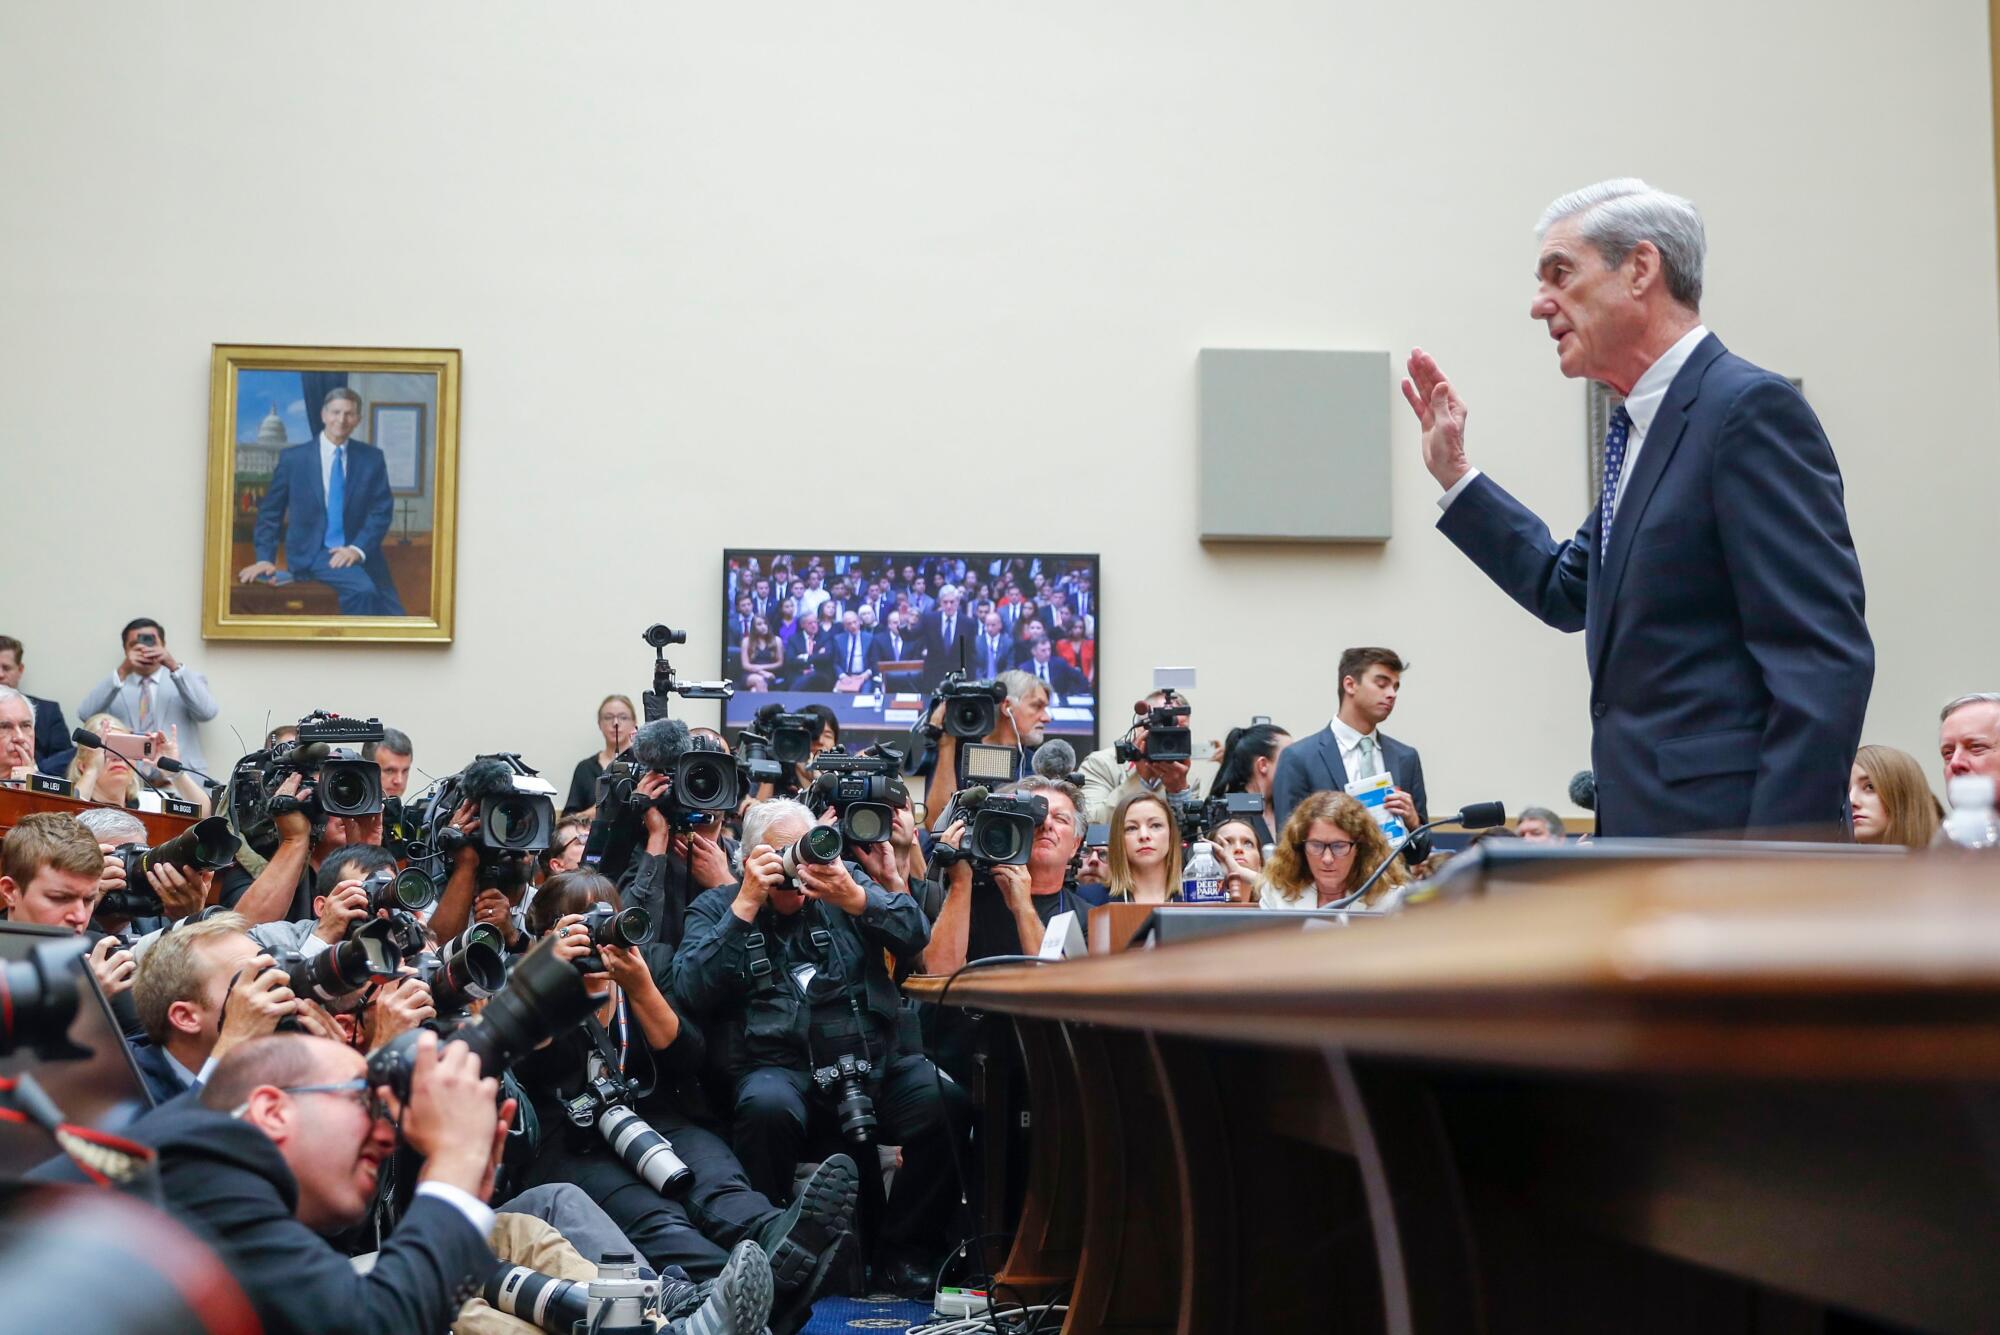 At right Robert Mueller stands behind a desk raising his right hand while facing a crowd of photographers on the ground